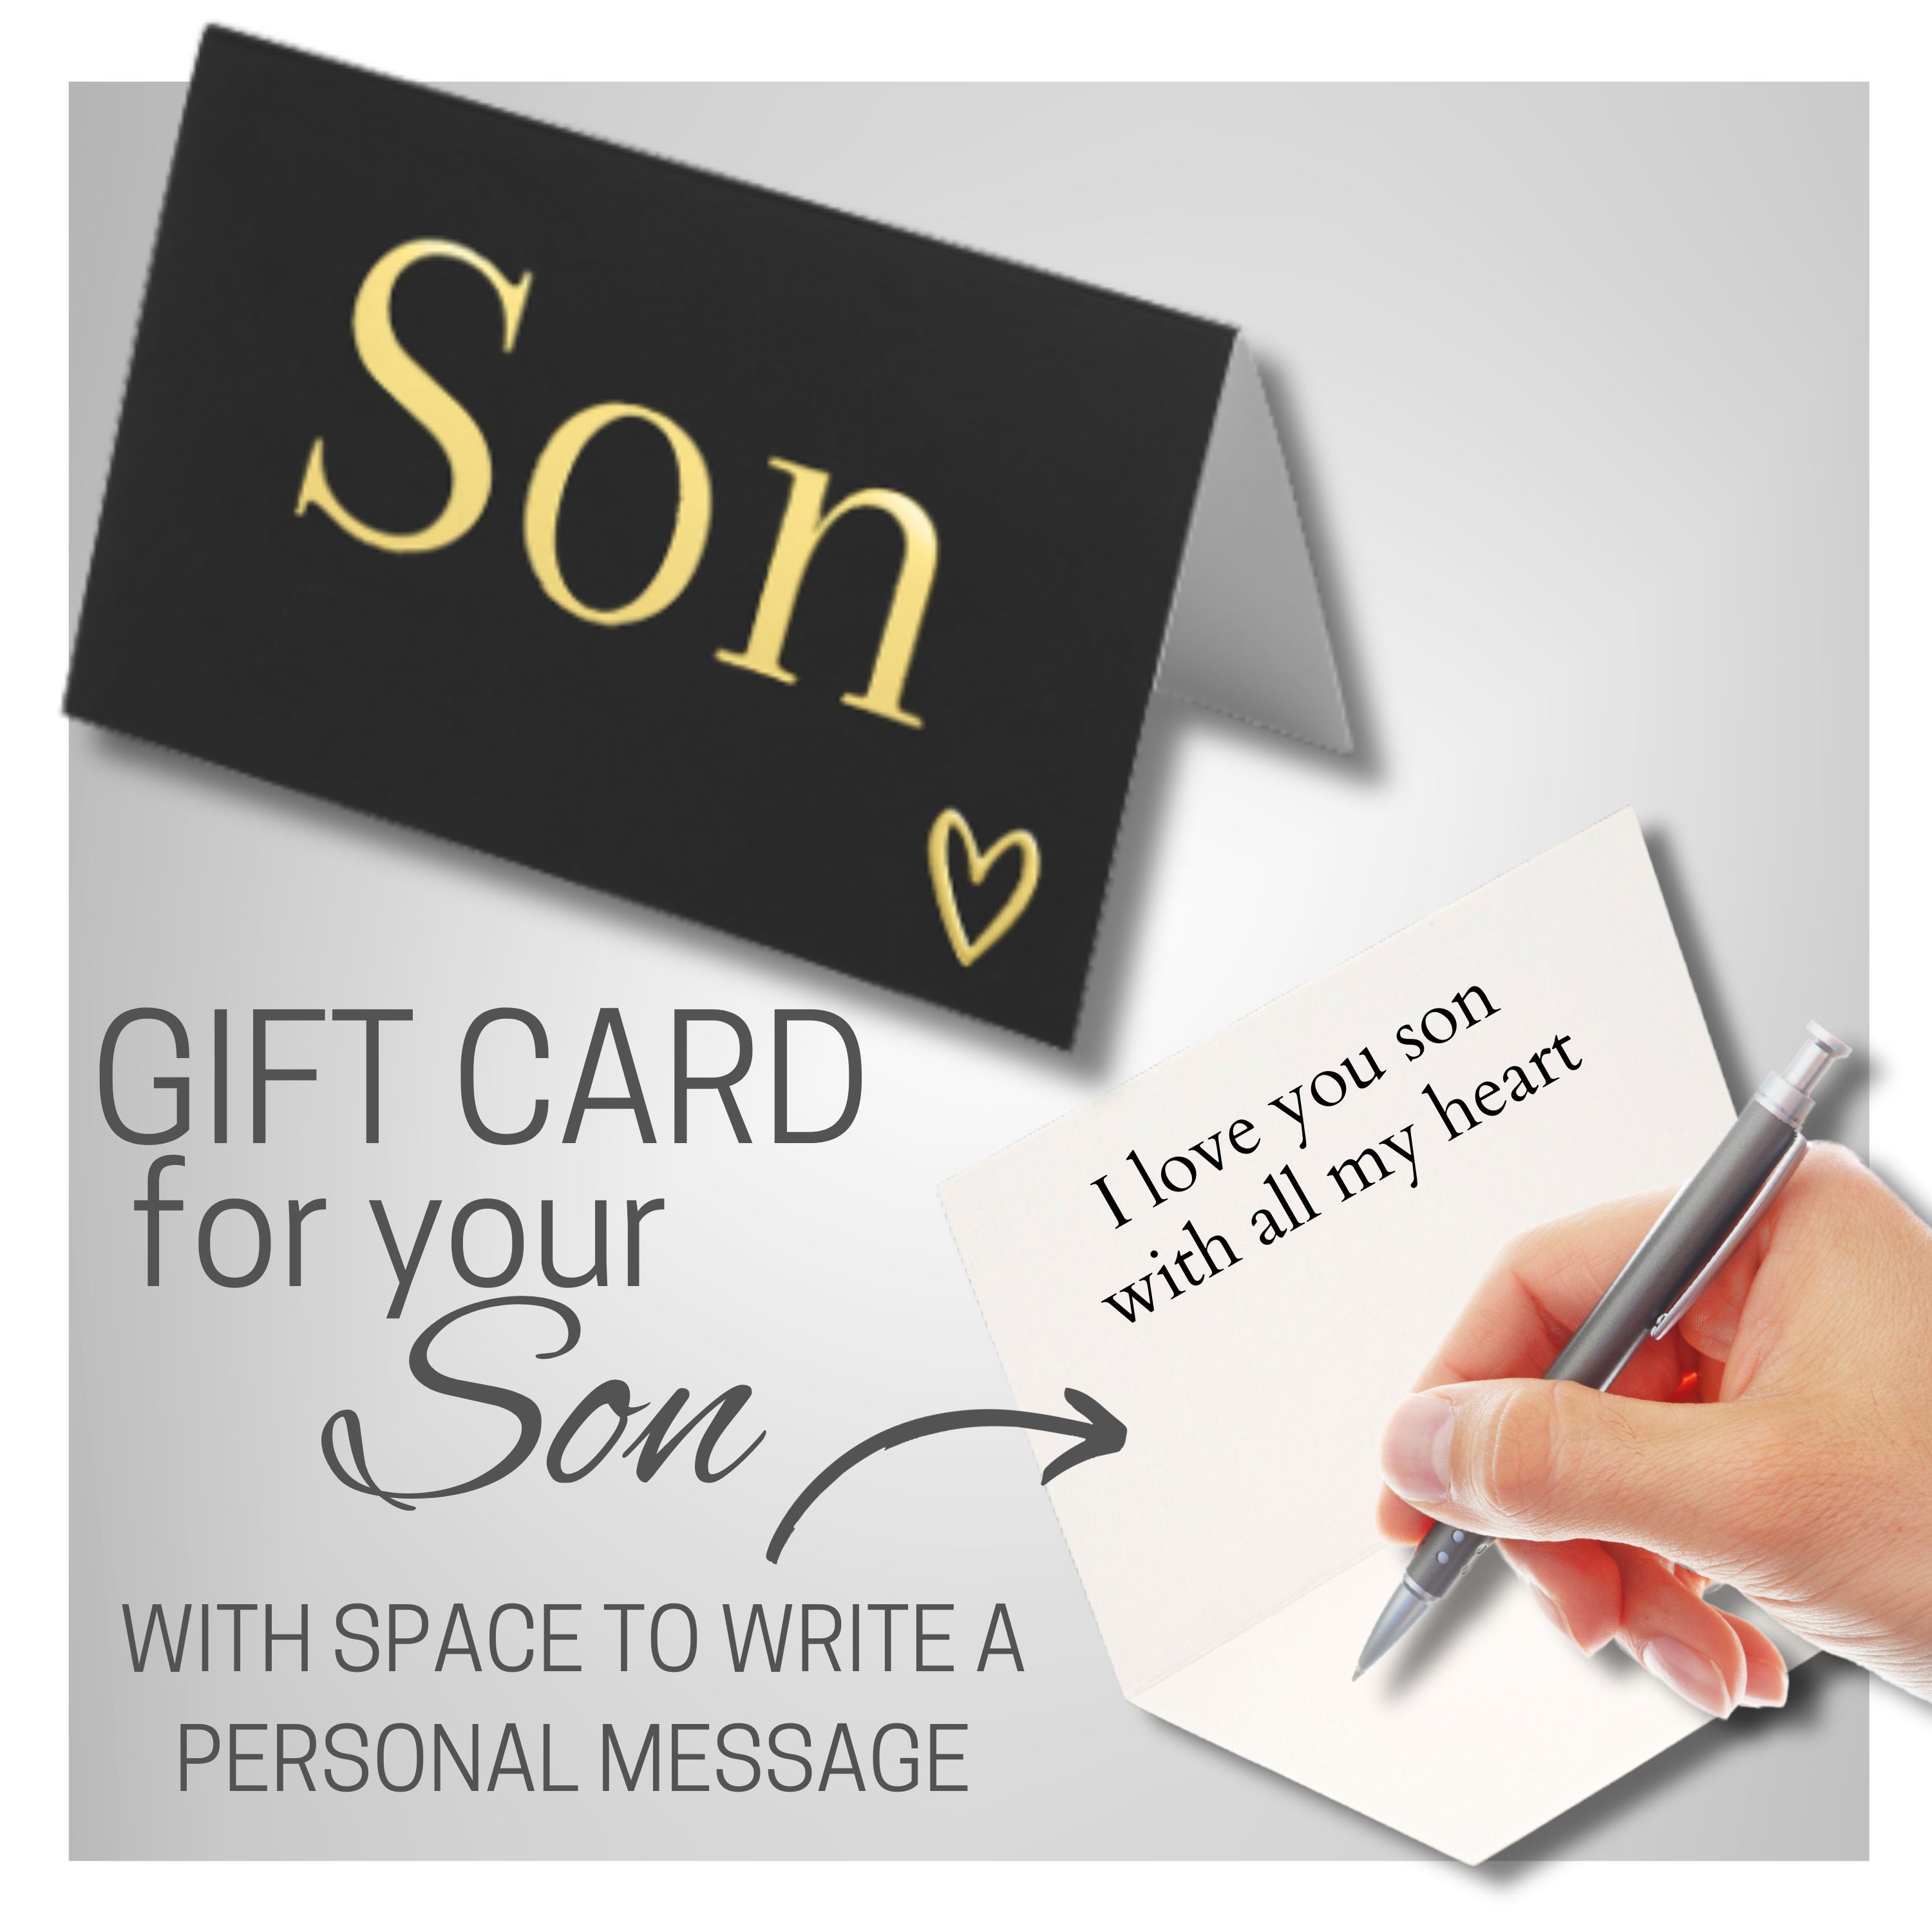 Gift card for son